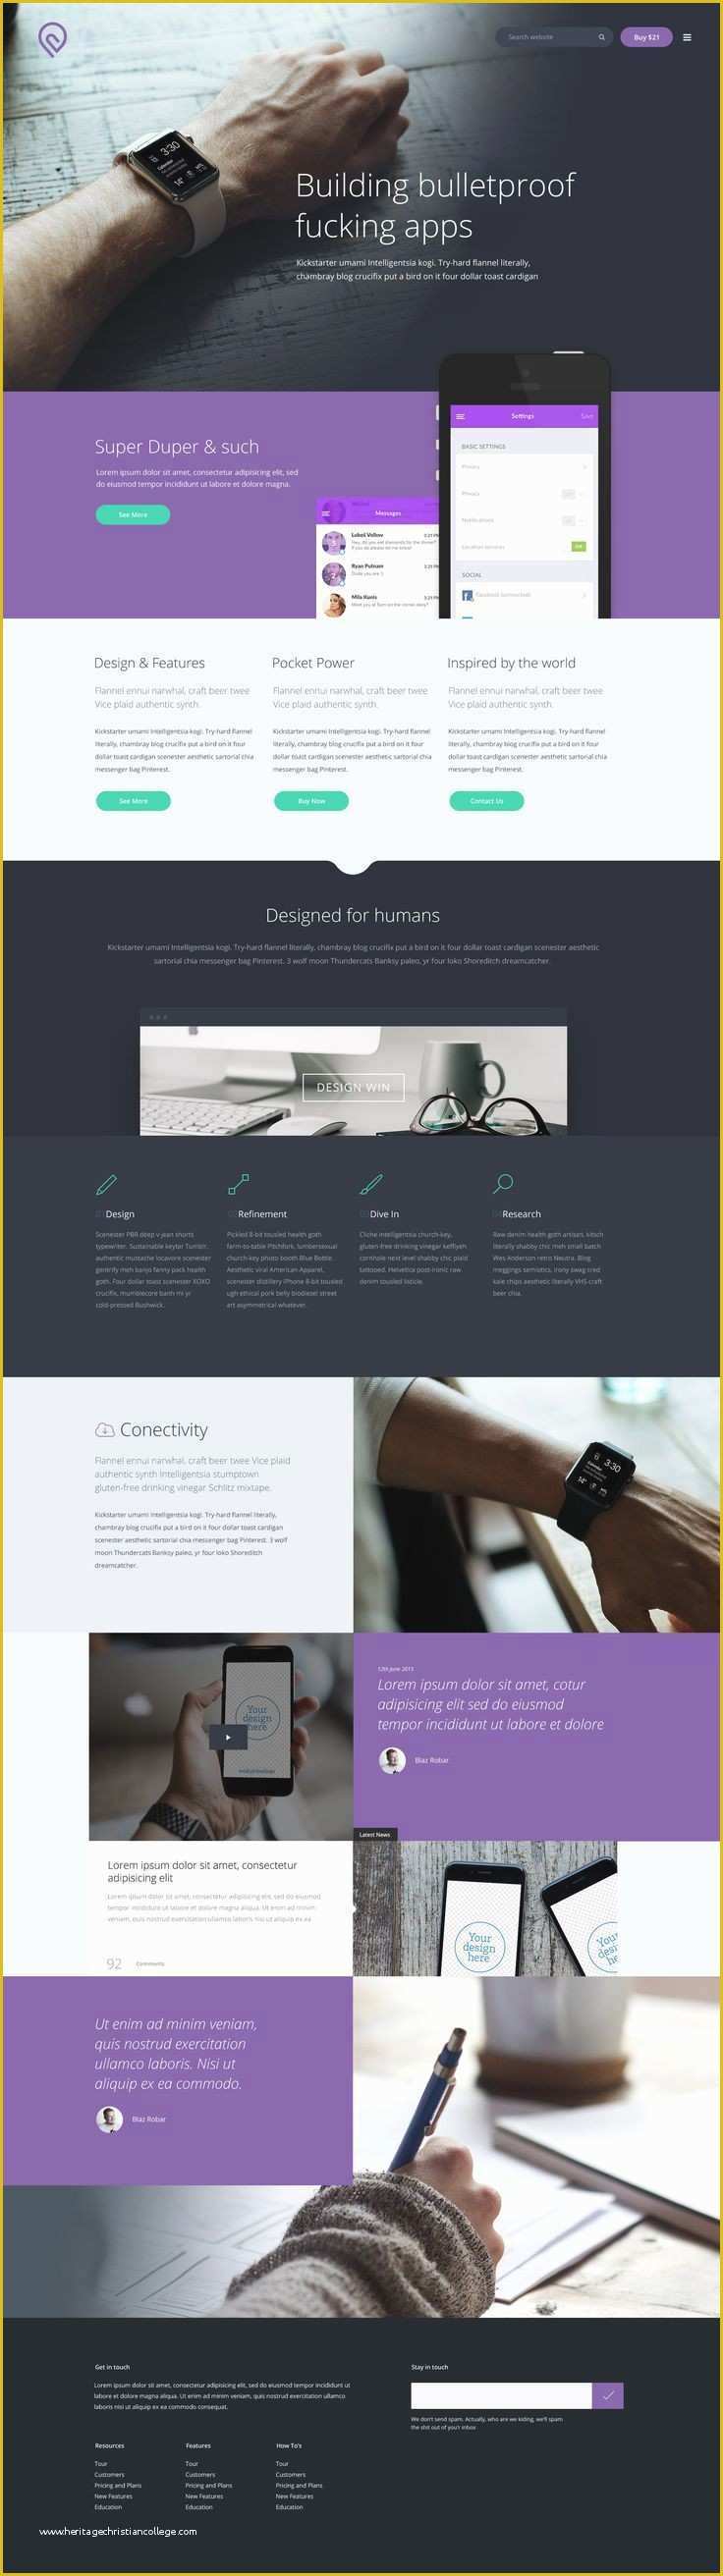 Responsive Website Templates Psd Free Download Of Beautiful Responsive Website Templates Free Download HTML